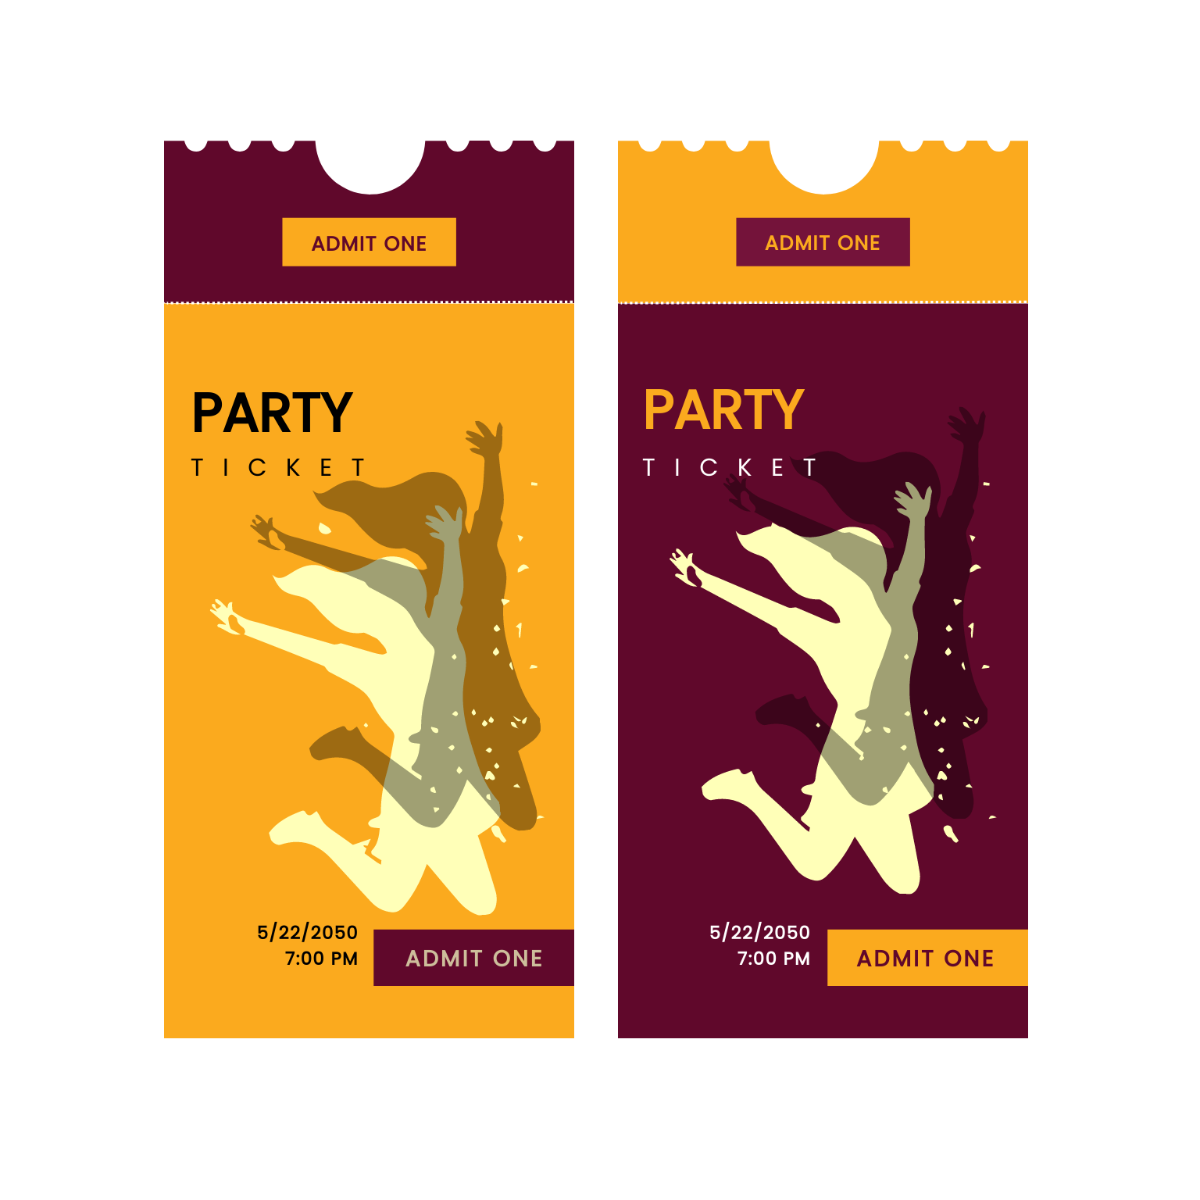 Party Ticket Vector Template